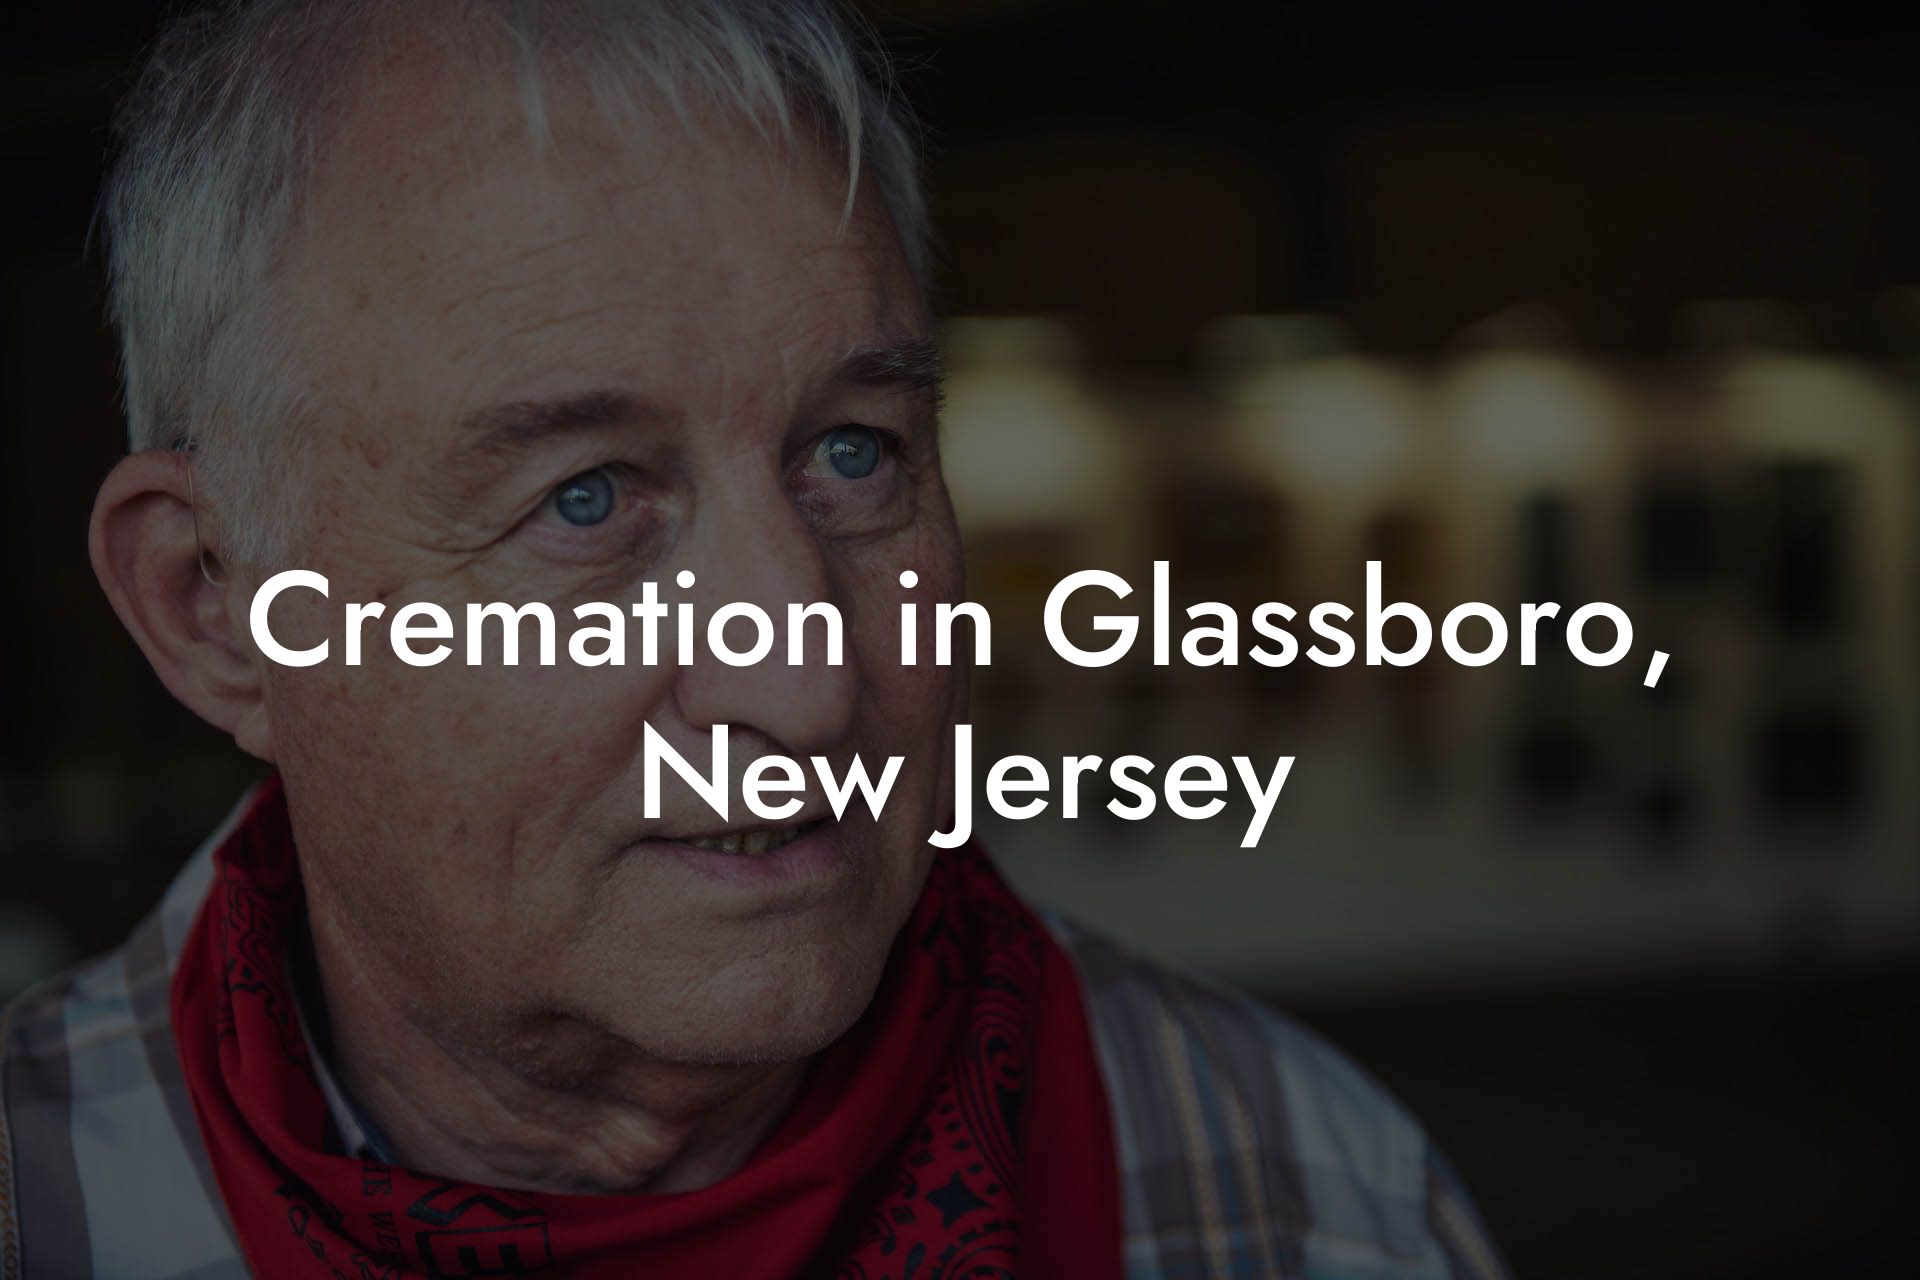 Cremation in Glassboro, New Jersey